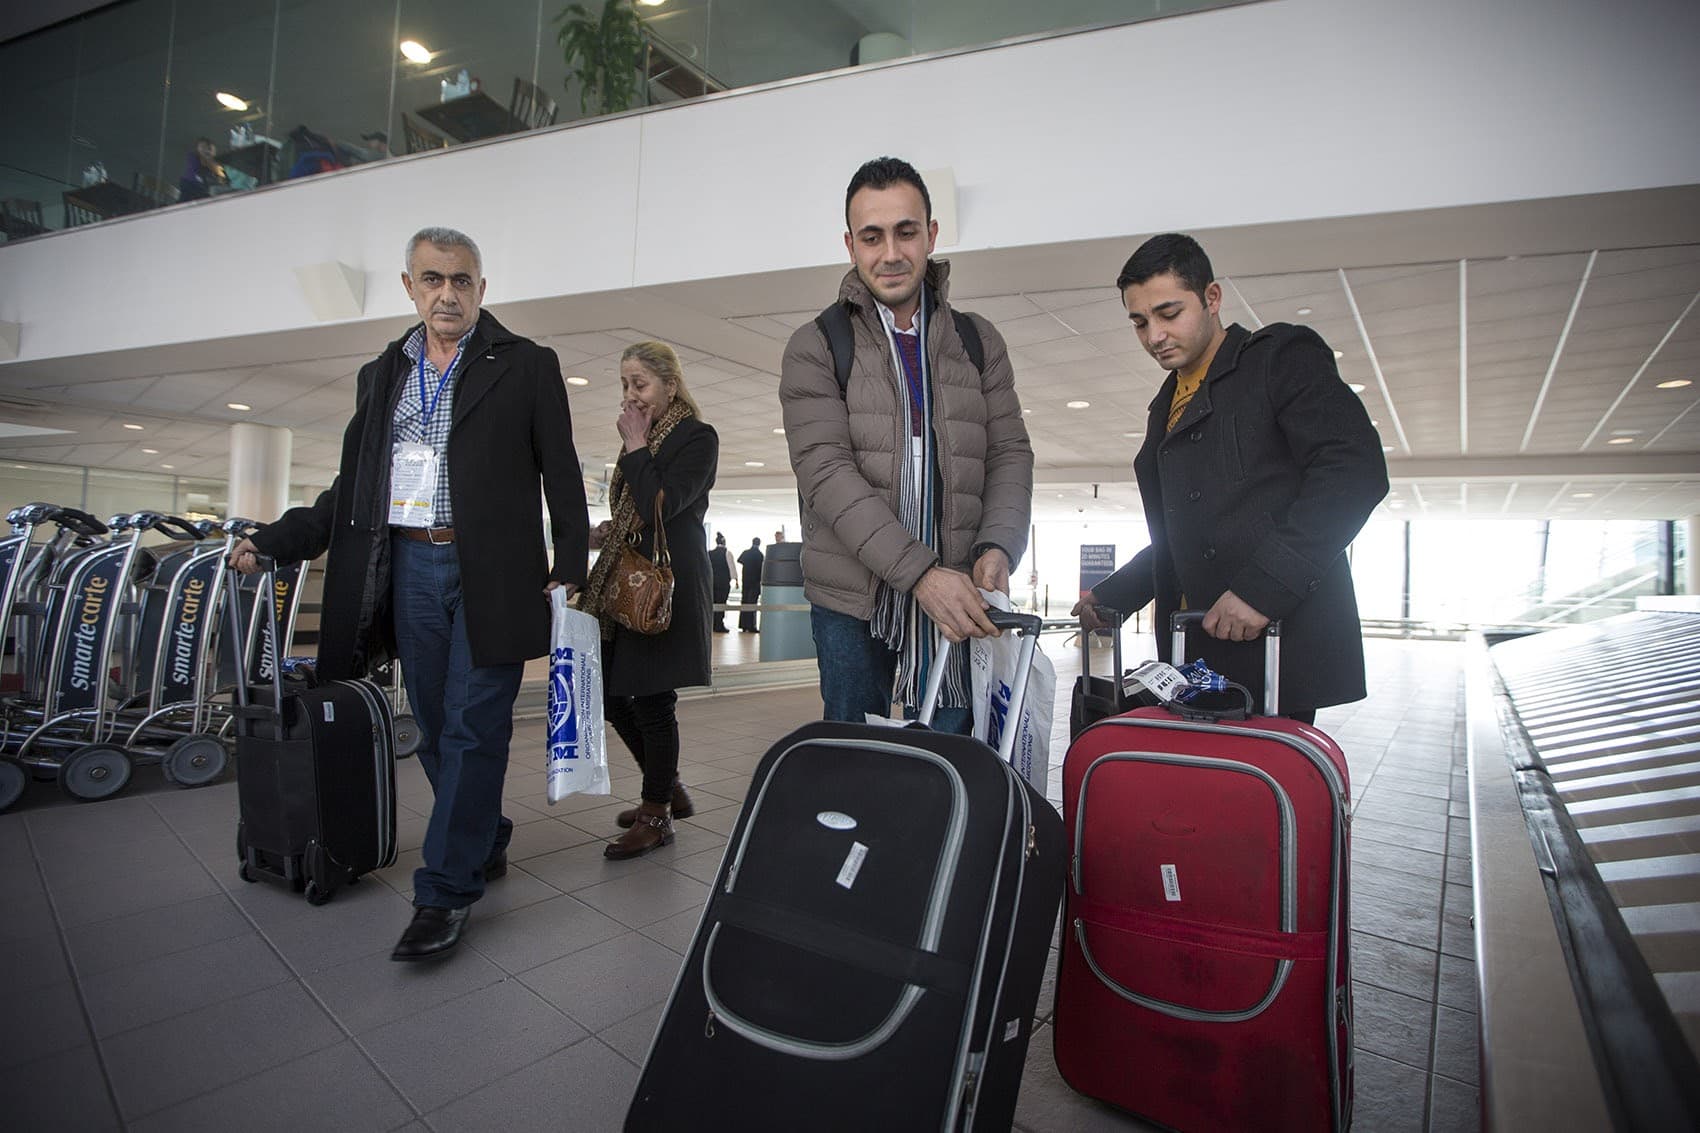 From left to right, Mohamad, Zeinab, Rashid and Ahmad Mahmoud arrive at Manchester-Boston Regional Airport in New Hampshire. (Jesse Costa/WBUR)